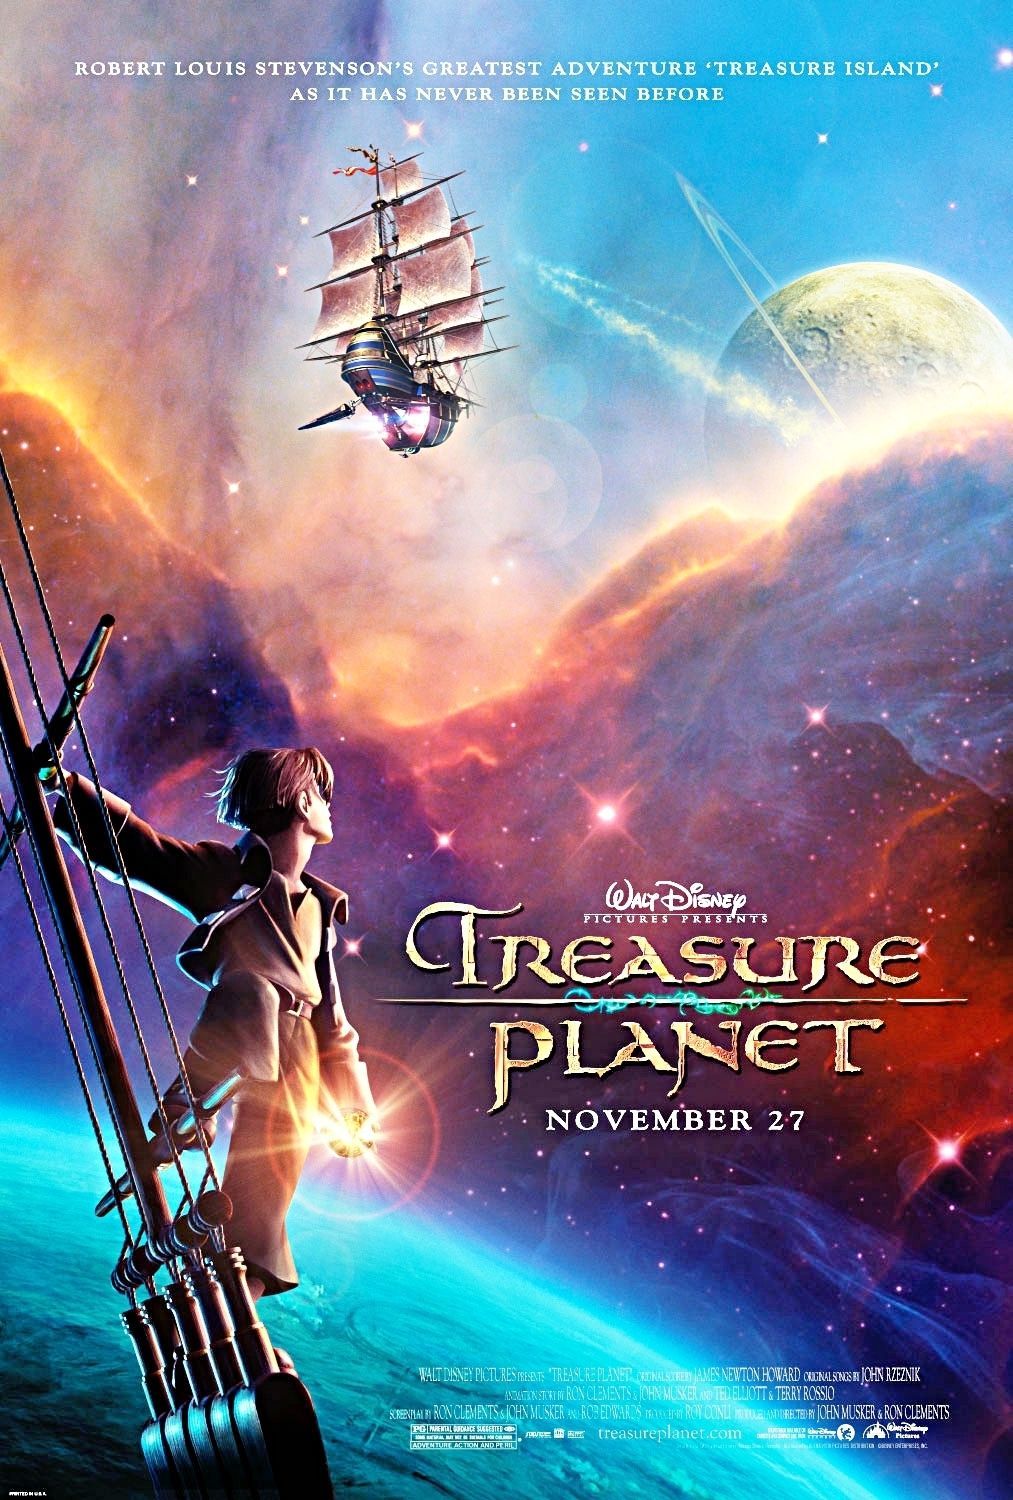 Treasure Planet Movie Poster with boy and flying ship.